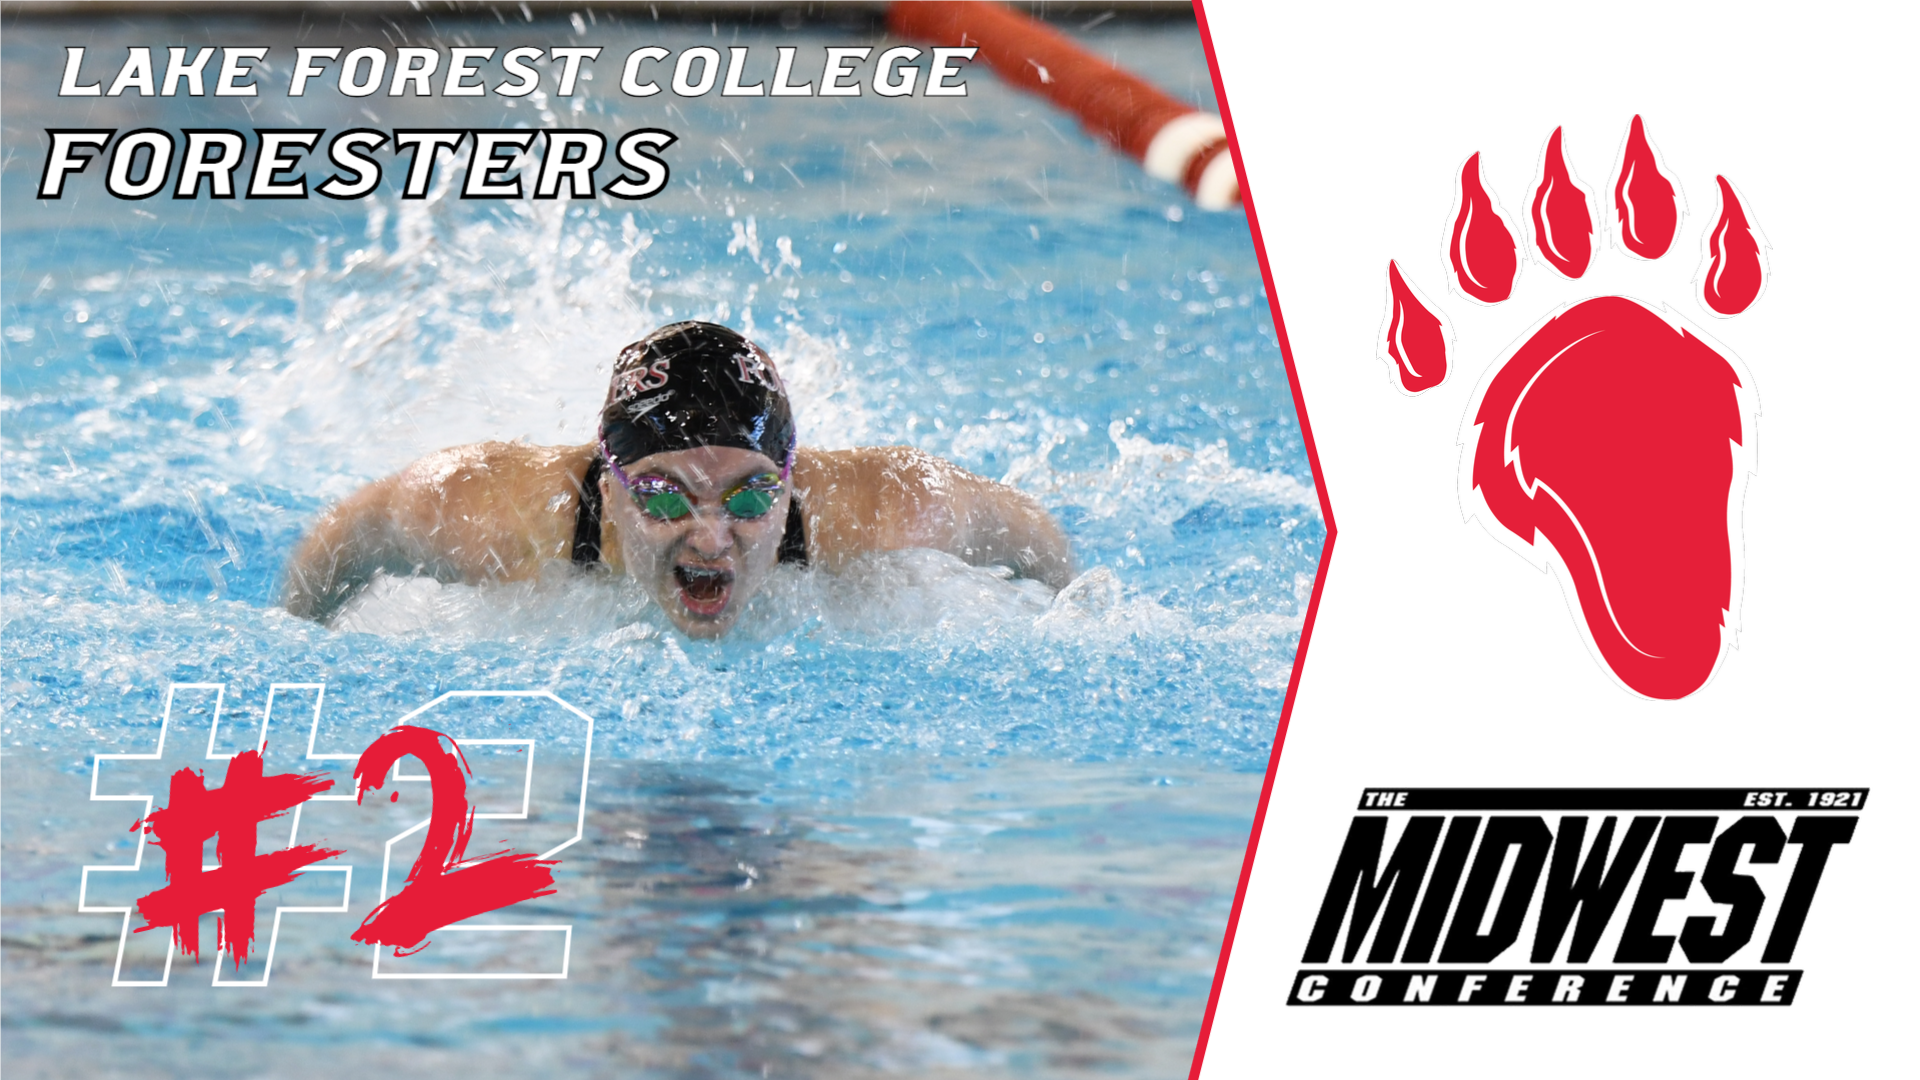 MWC Coaches' Poll Puts Foresters Placing Second Overall